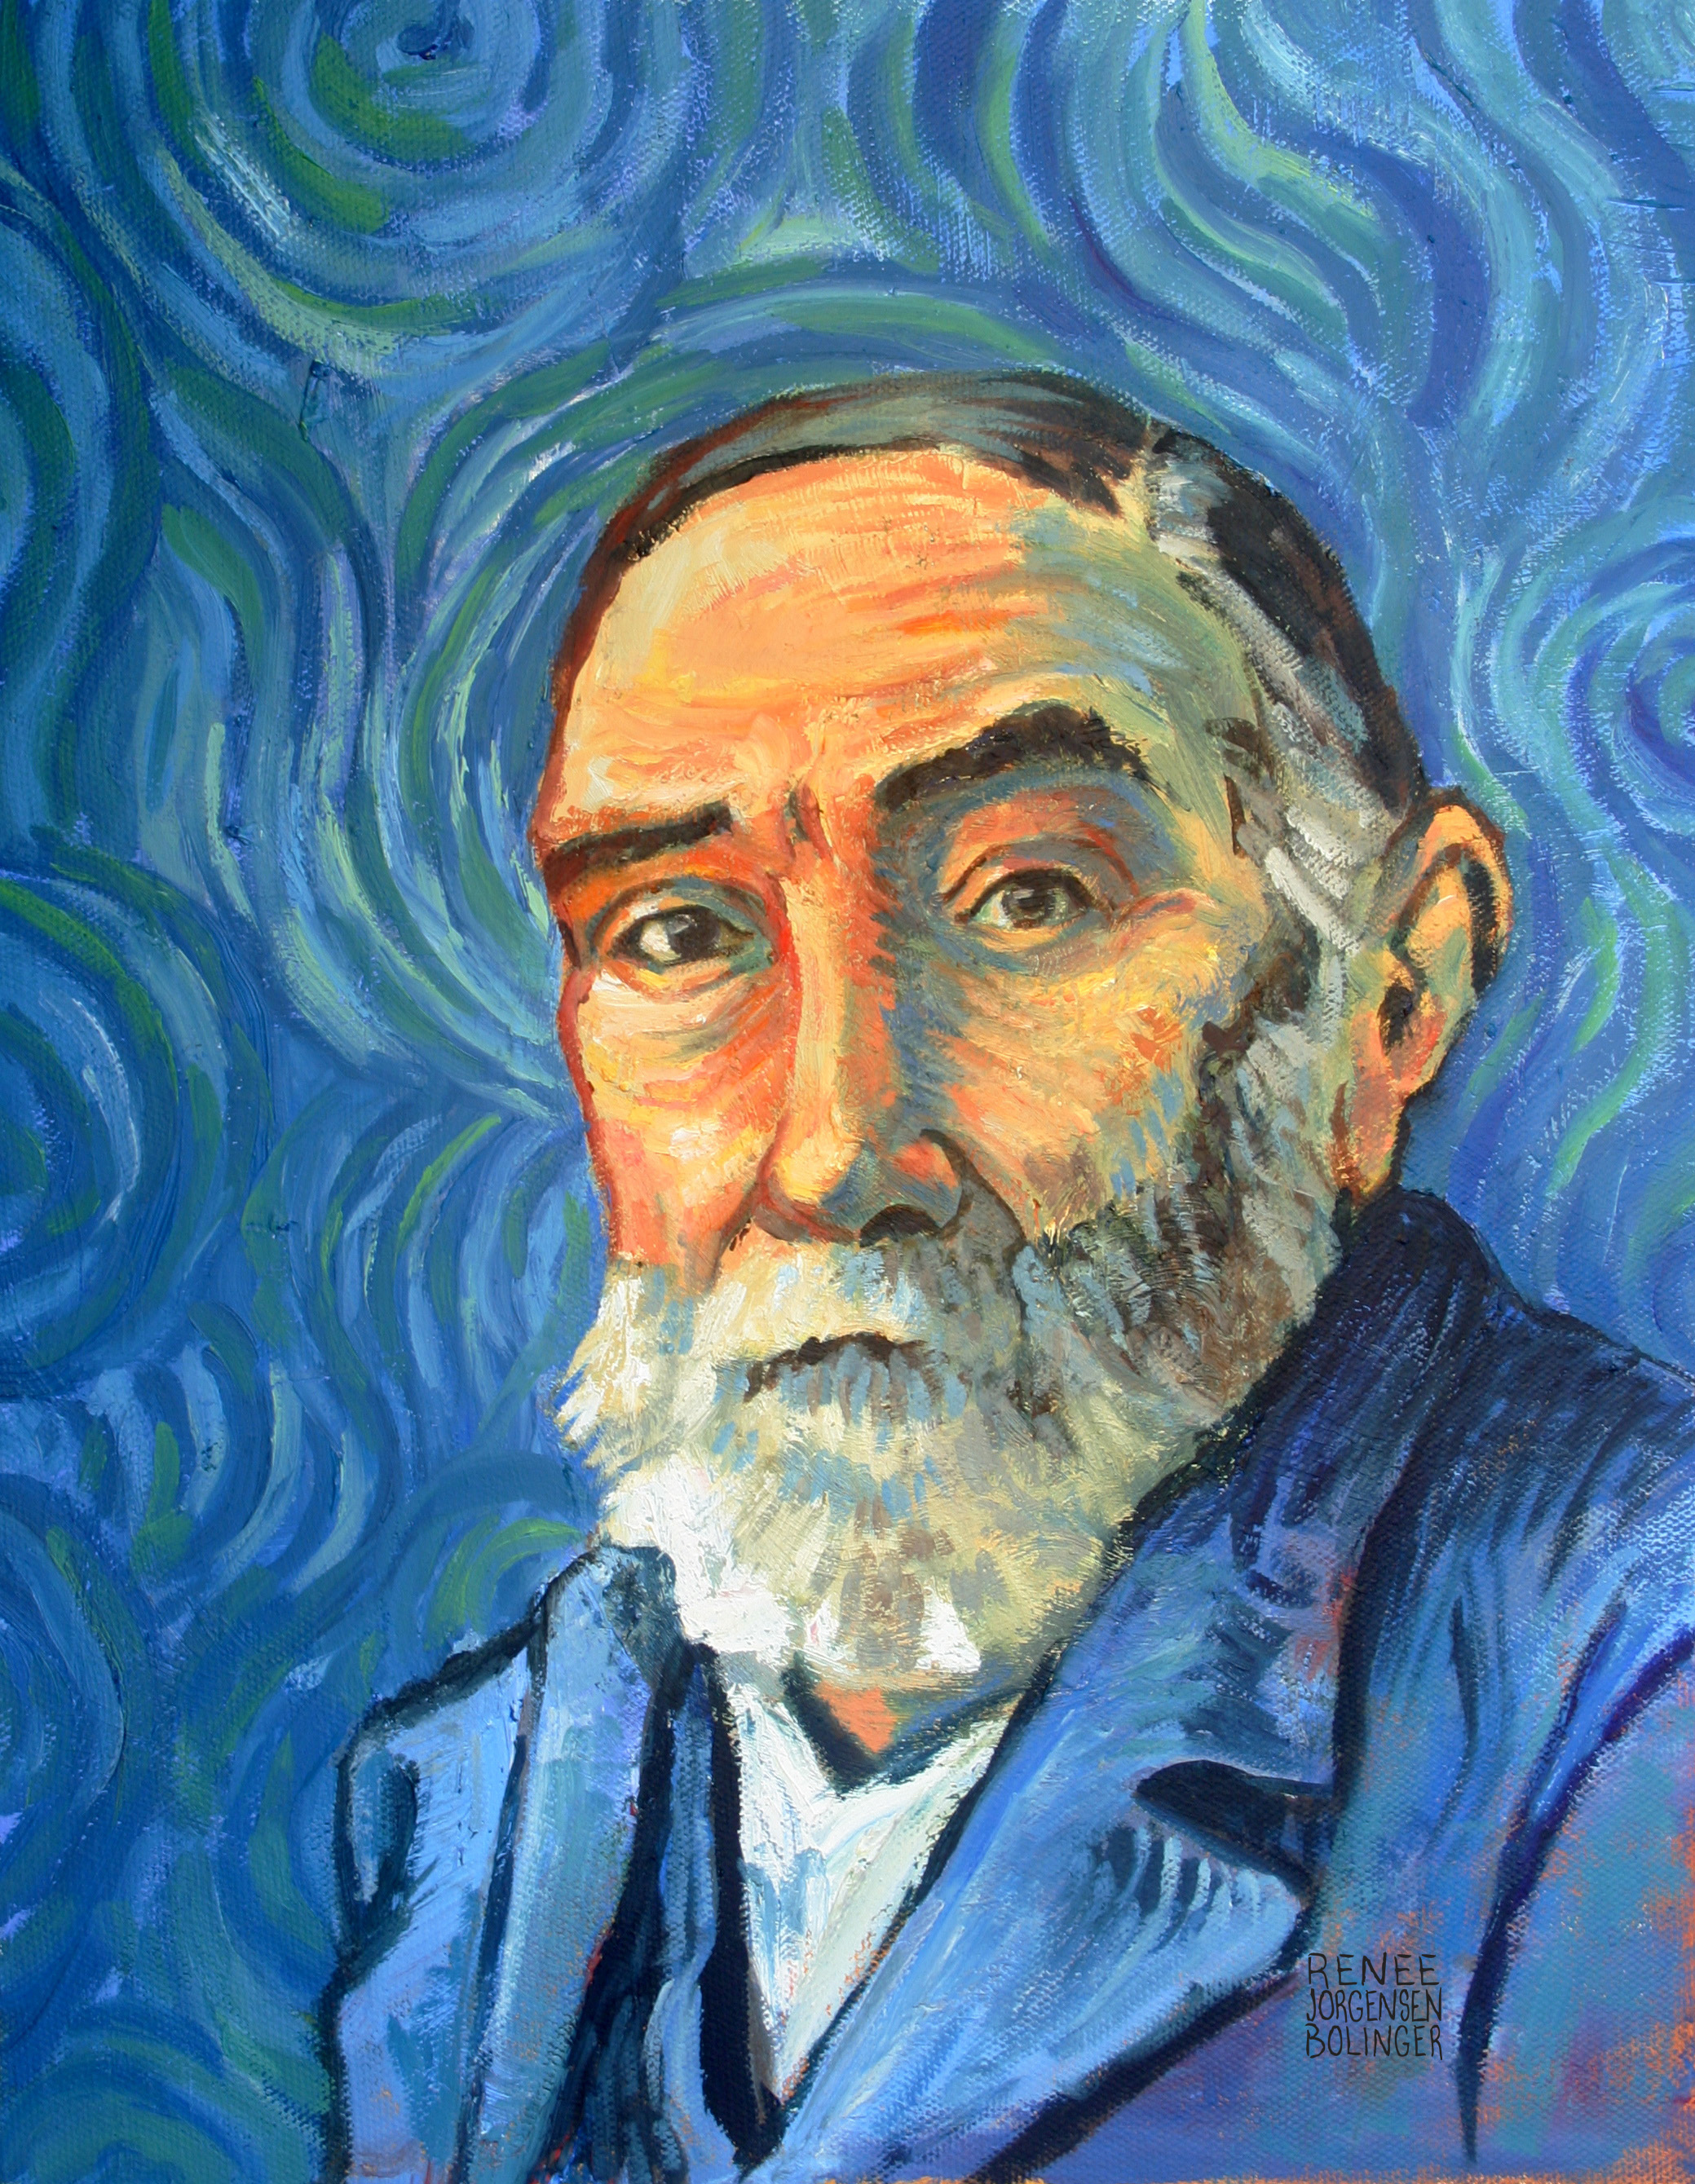 10 Unexpected Philosopher Portraits In The Styles Of Famous Artists